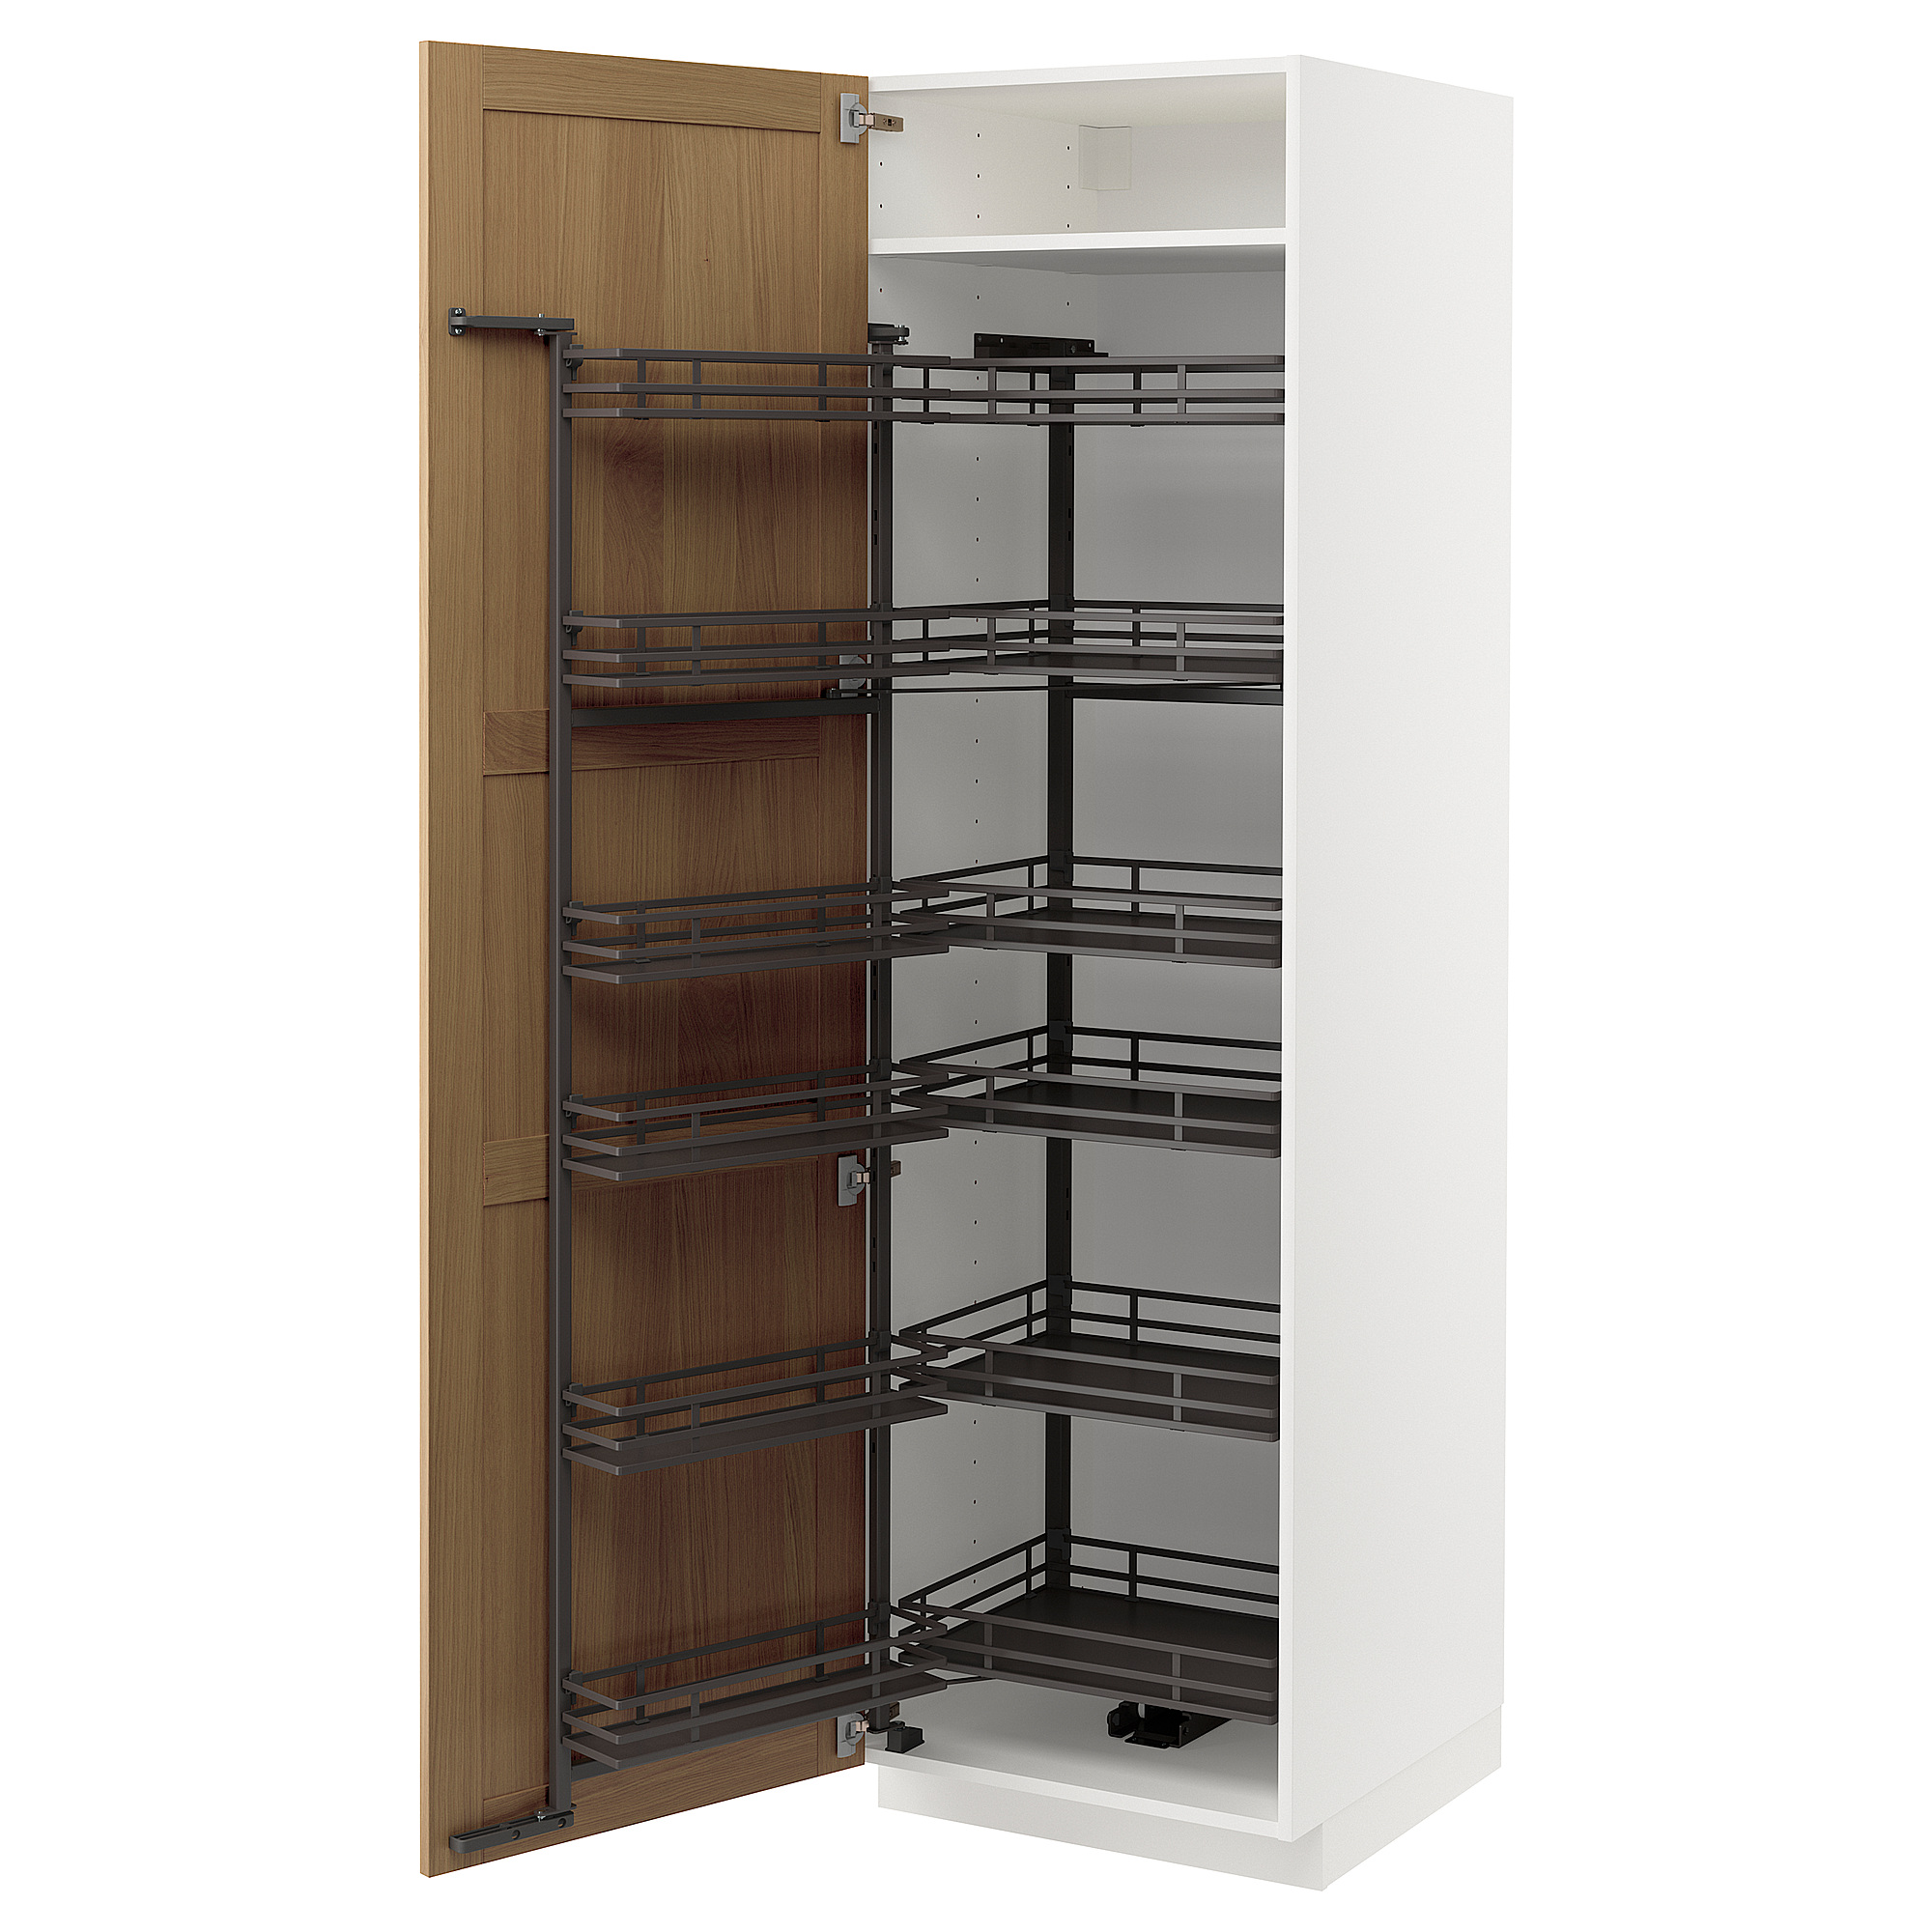 METOD high cabinet with pull-out pantry